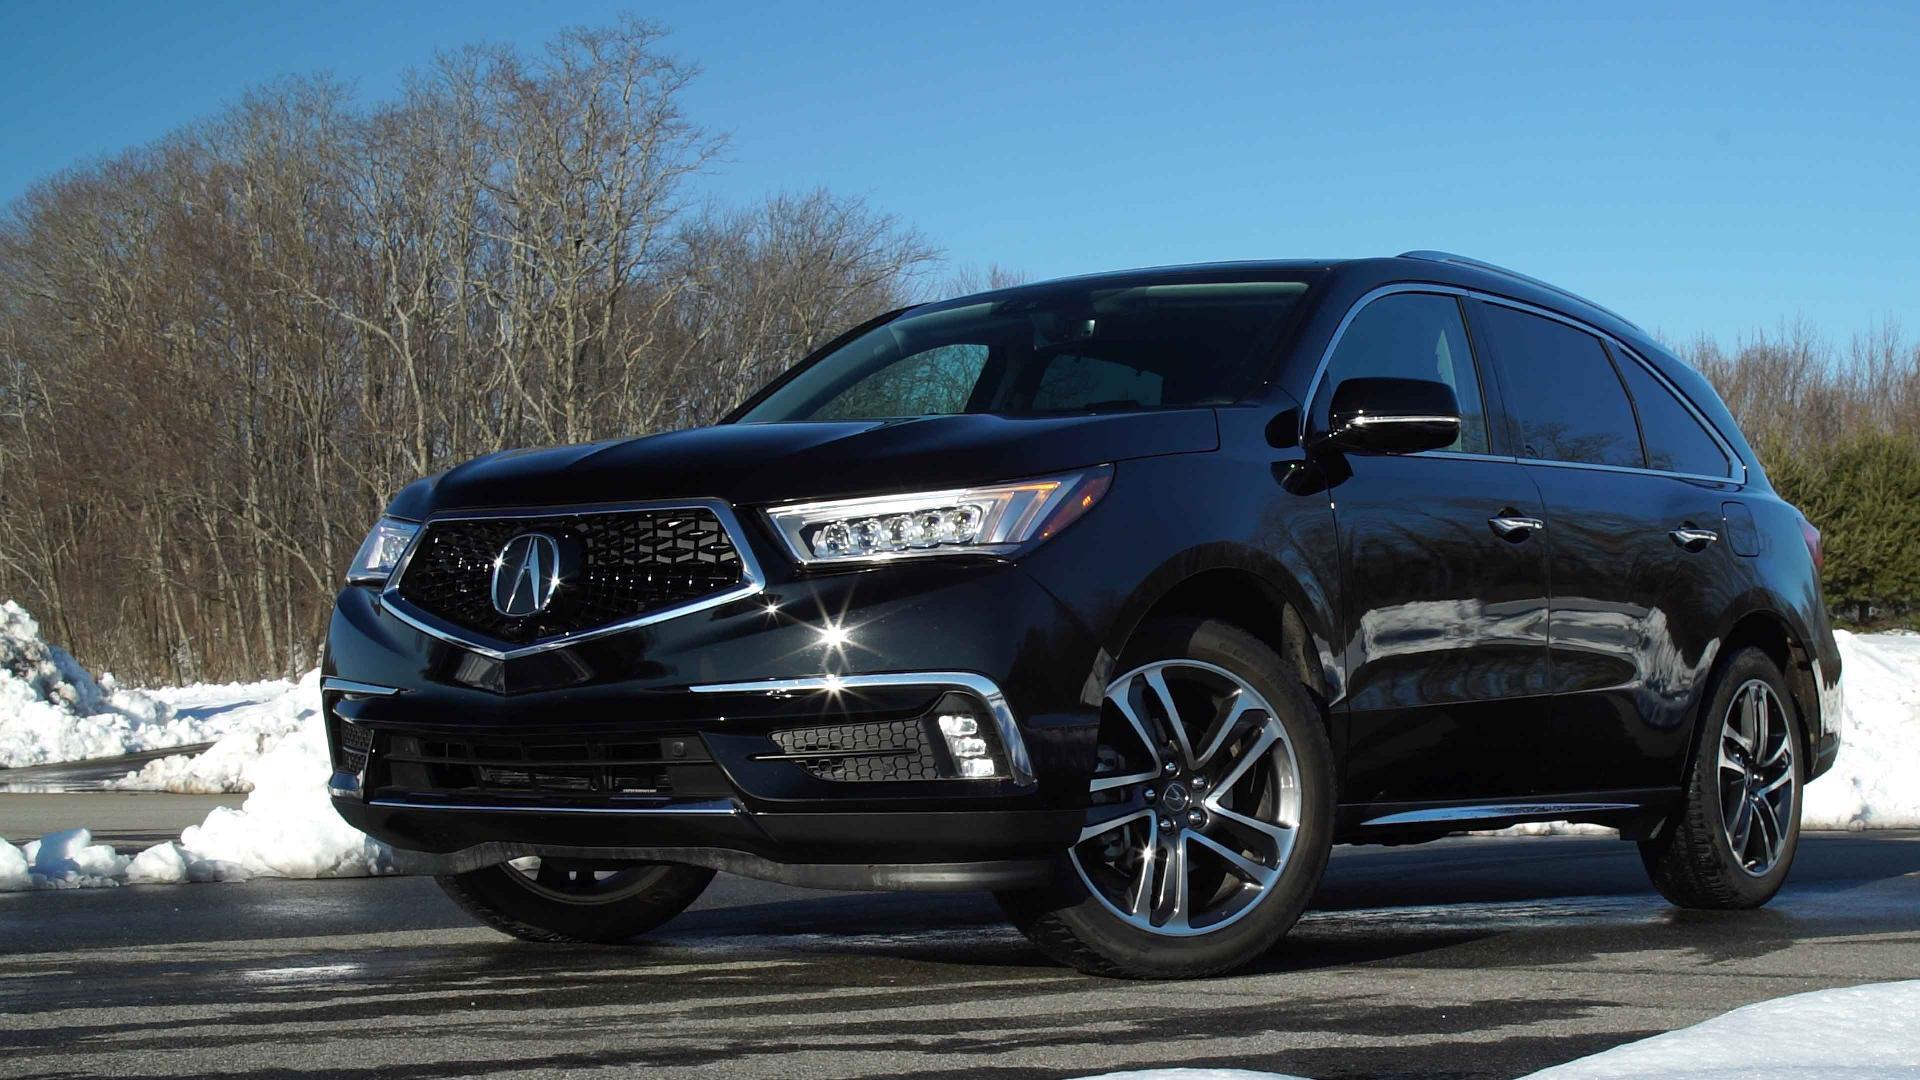 2017 Acura MDX Changes for the Better - Consumer Reports